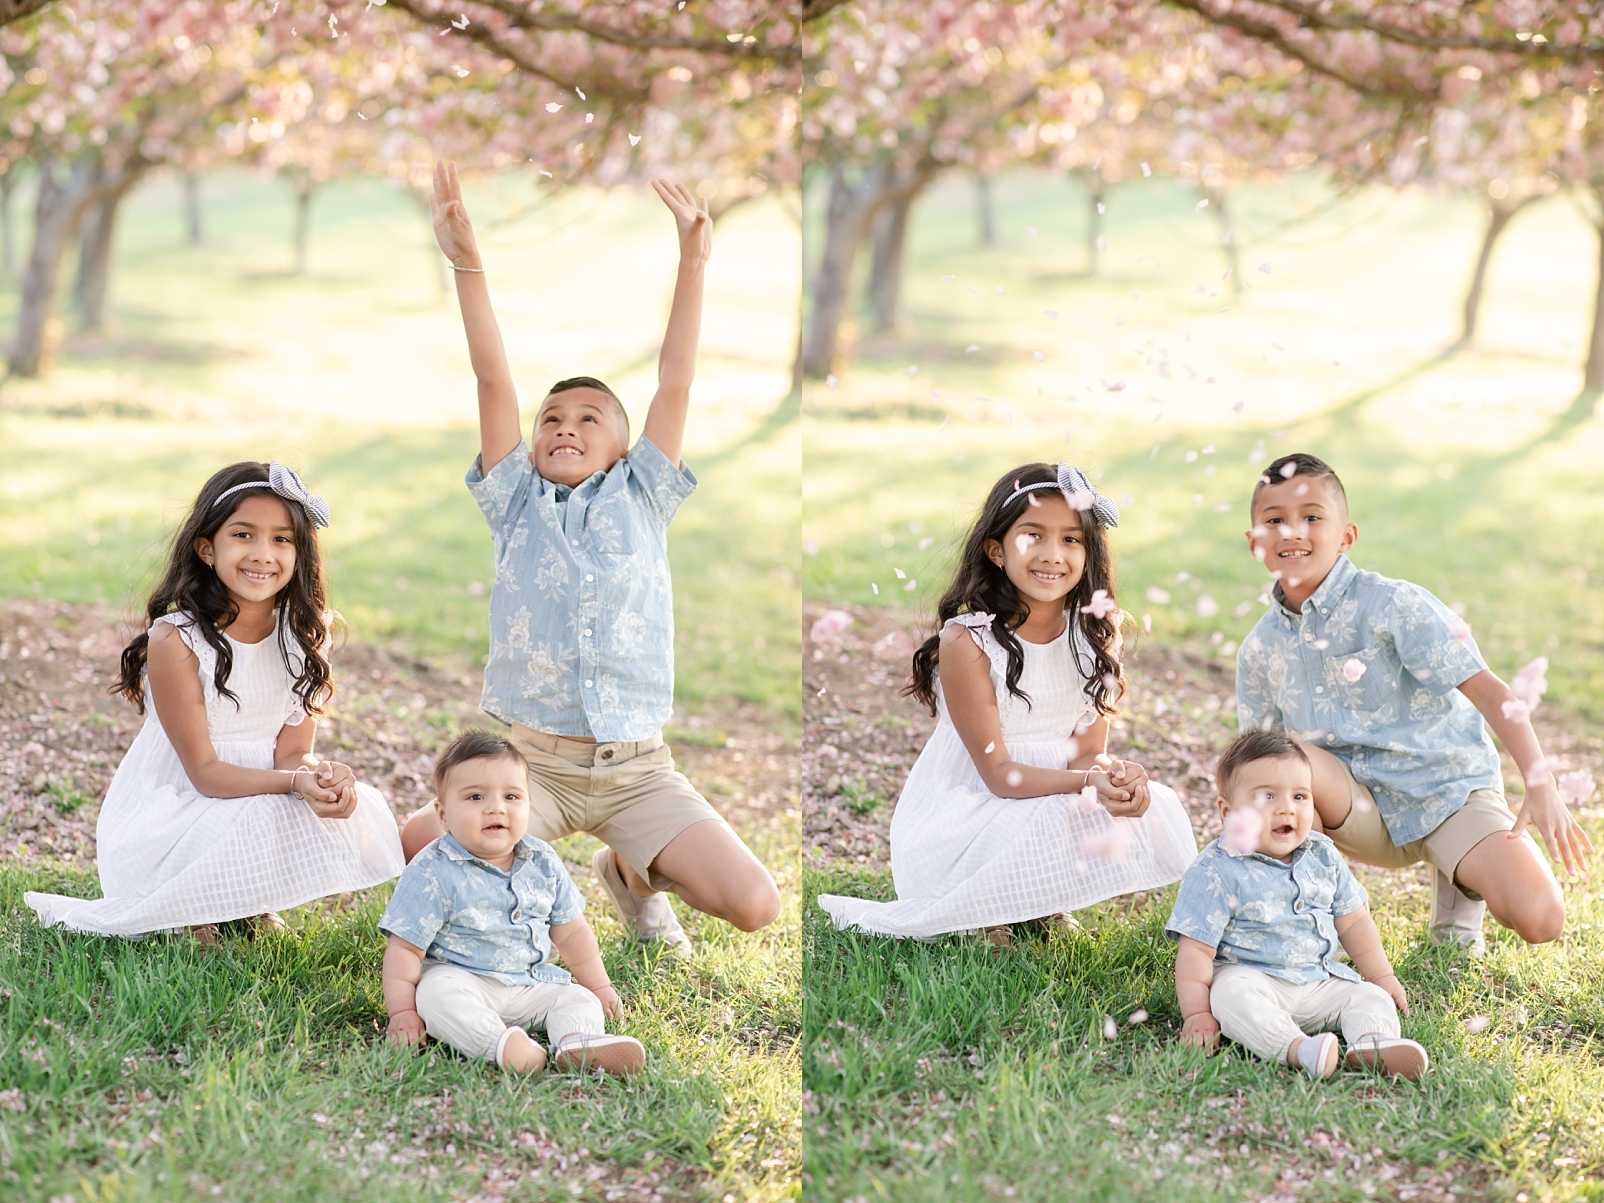 Spring portraits throwing Cherry blossom petals on the ground